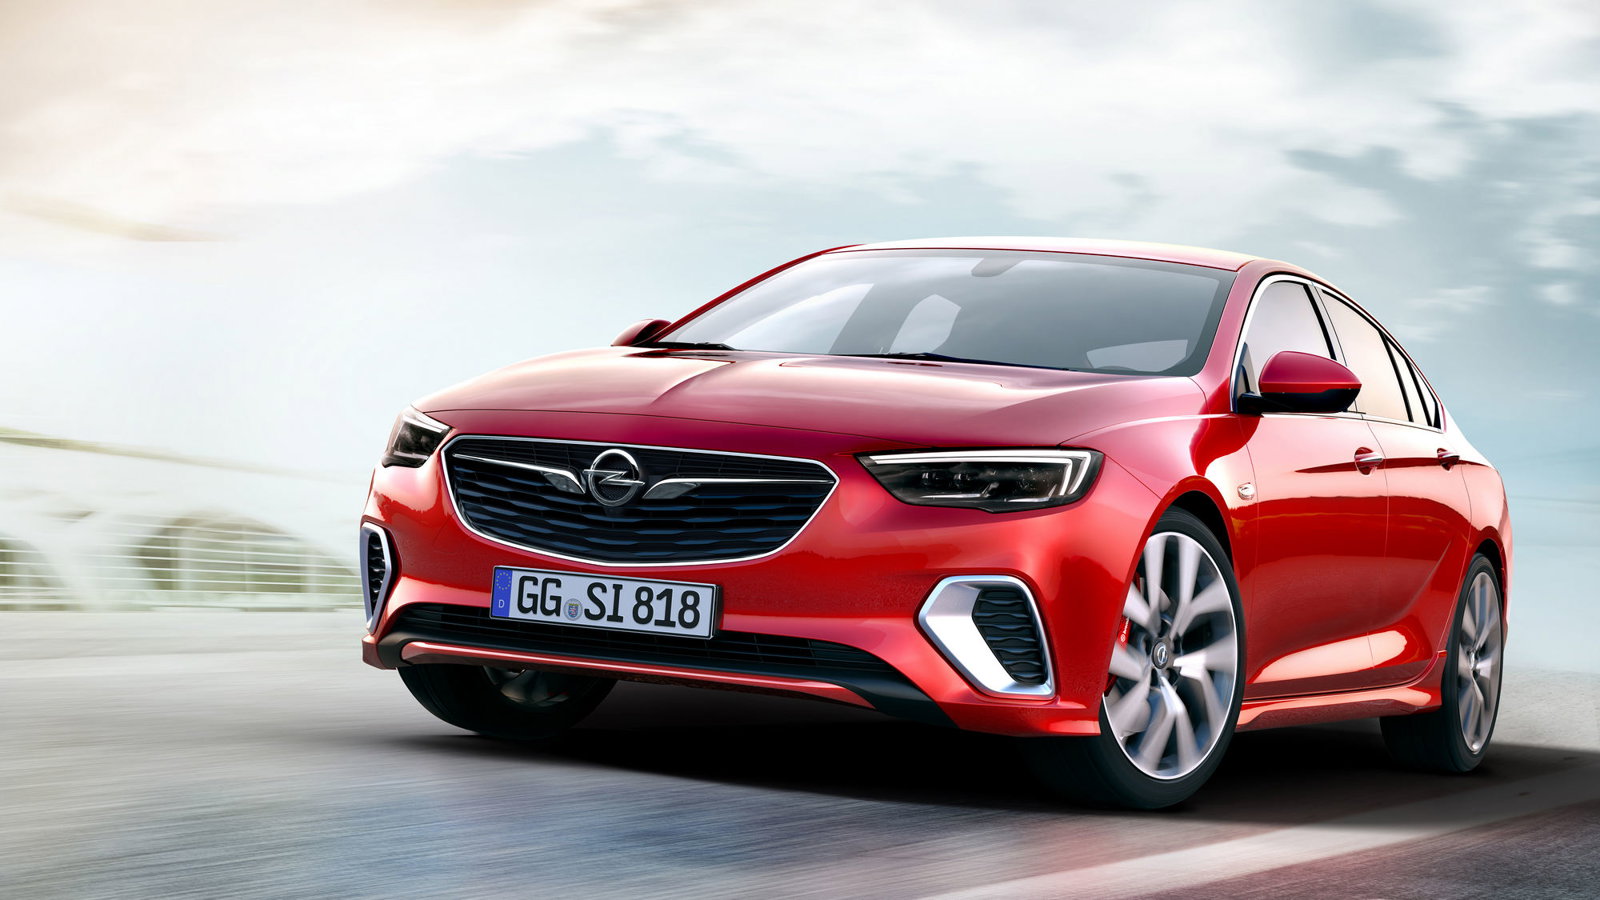 Insignia GSi replaces the former OPC with a leaner, model | DriveMag Cars